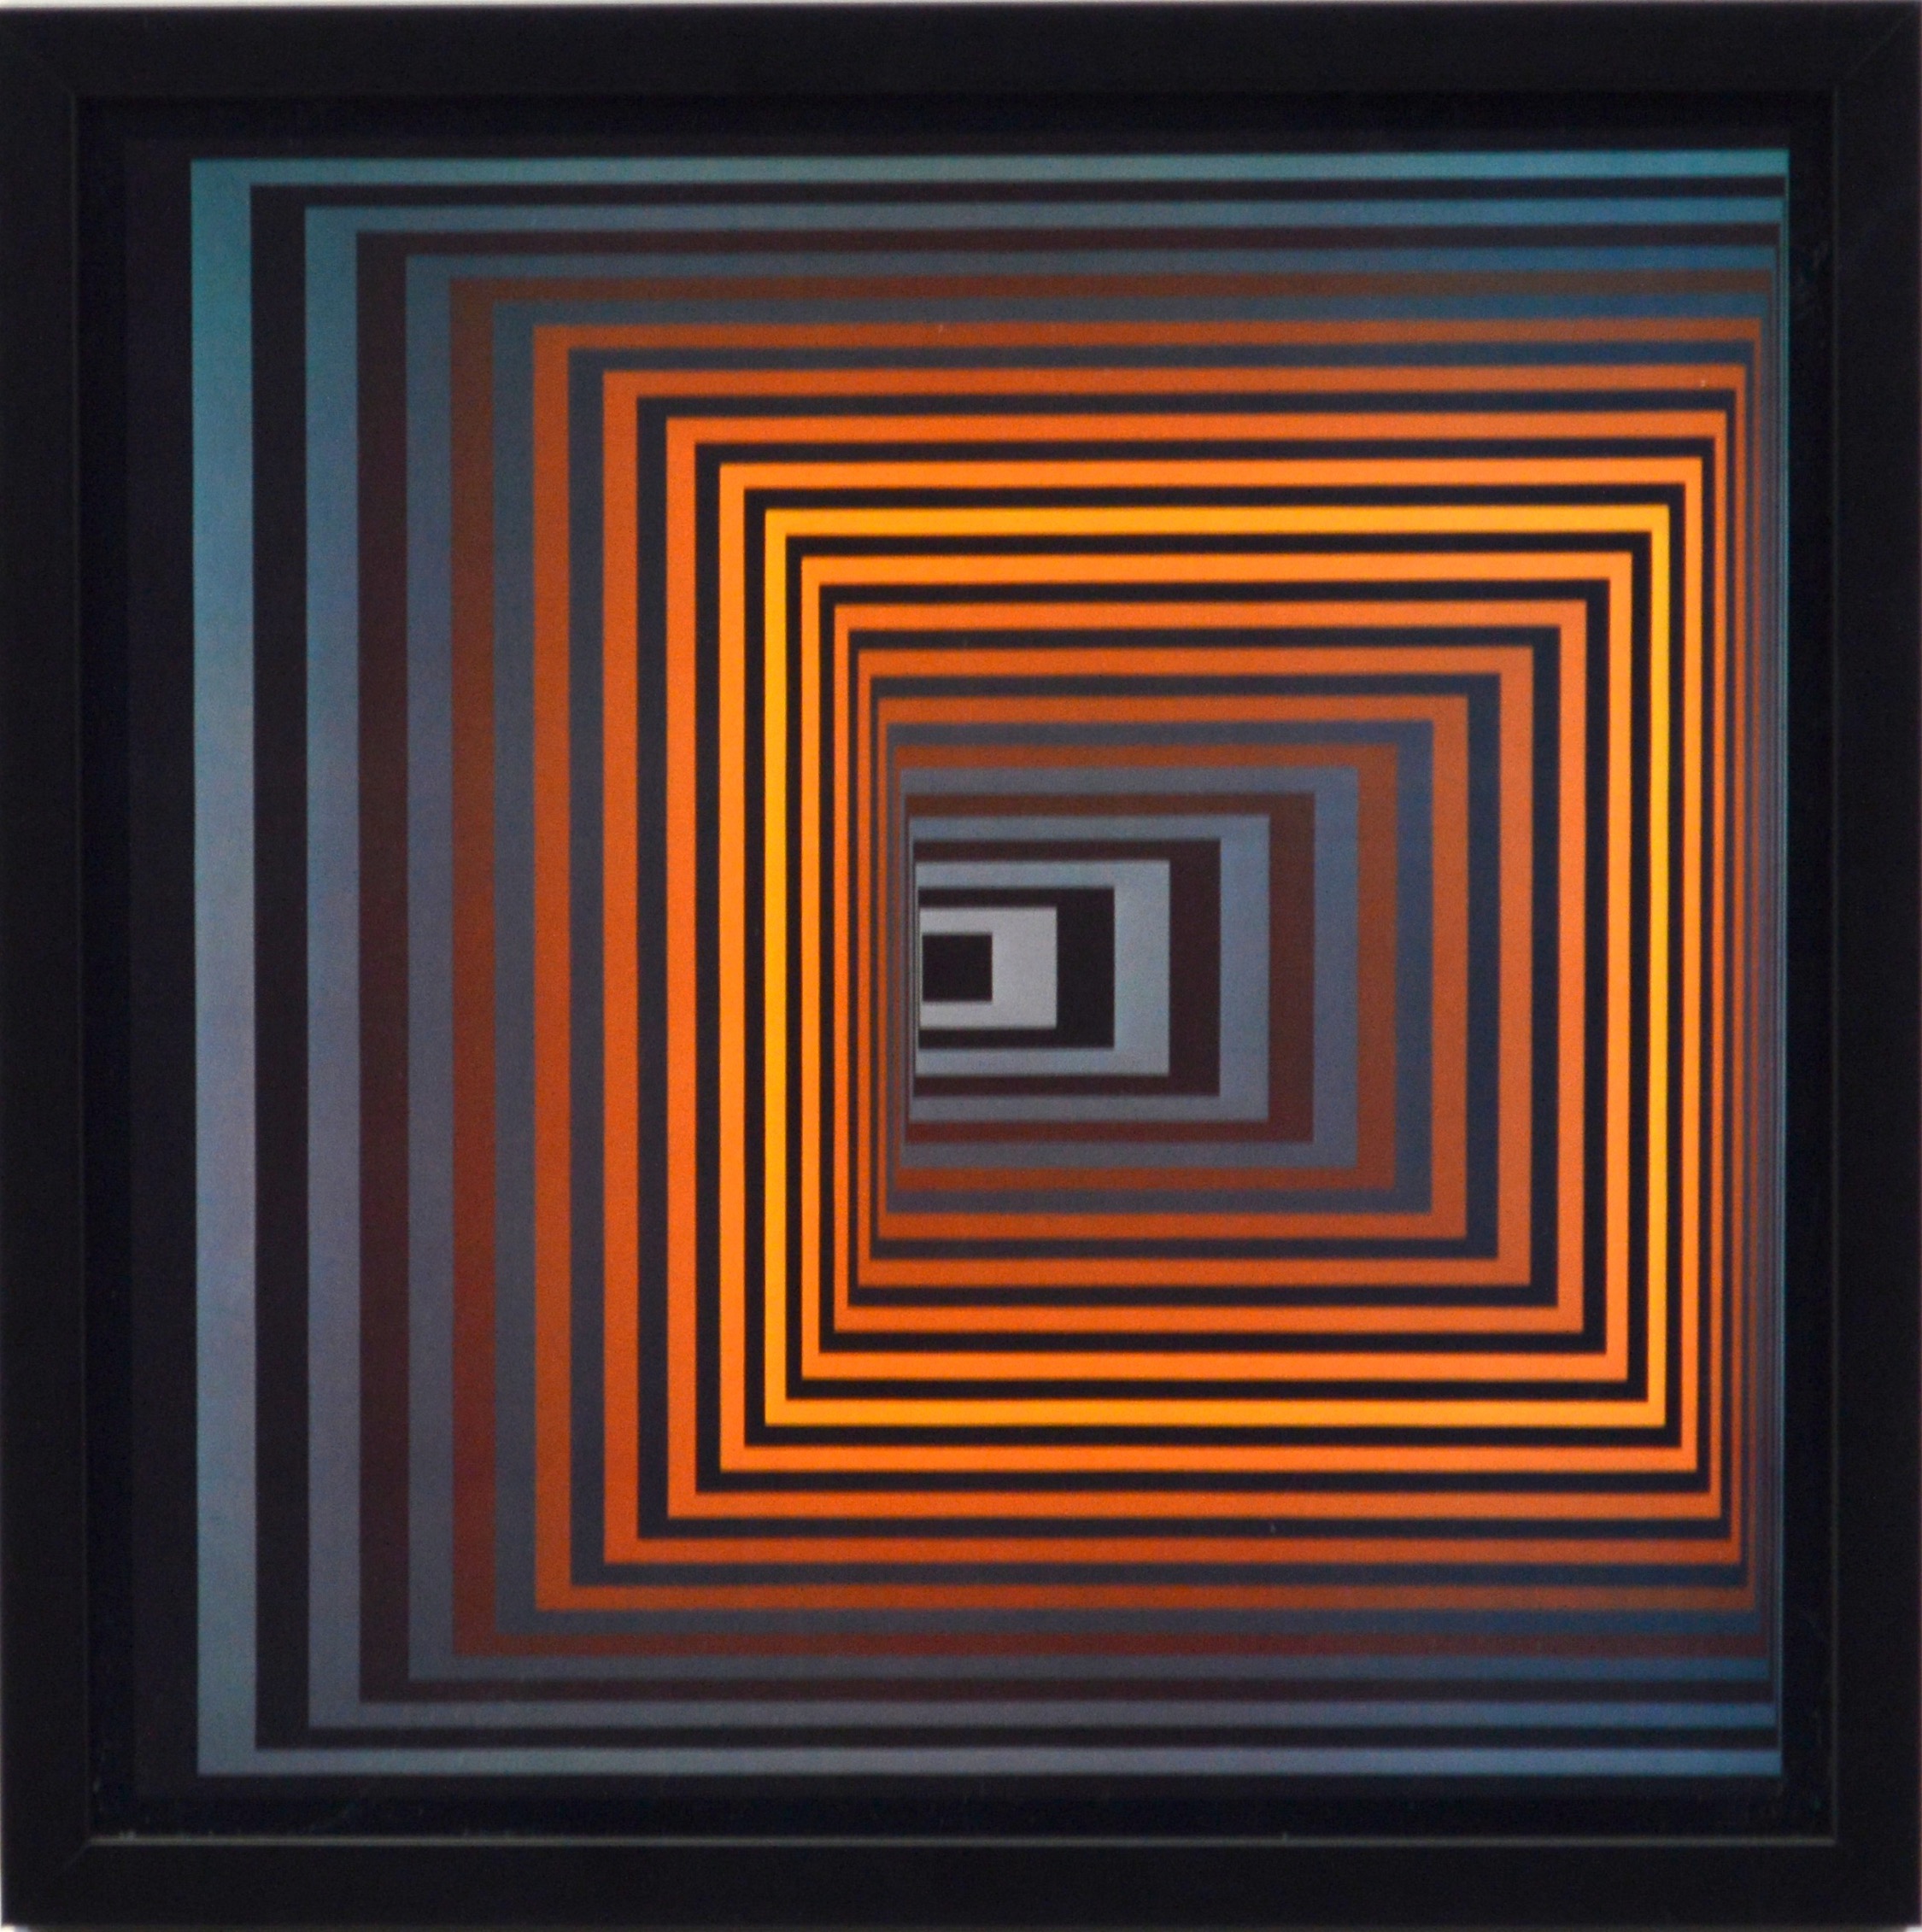 VICTOR VASARELY - Vonal-Fegn, 1973 (colored etching) 